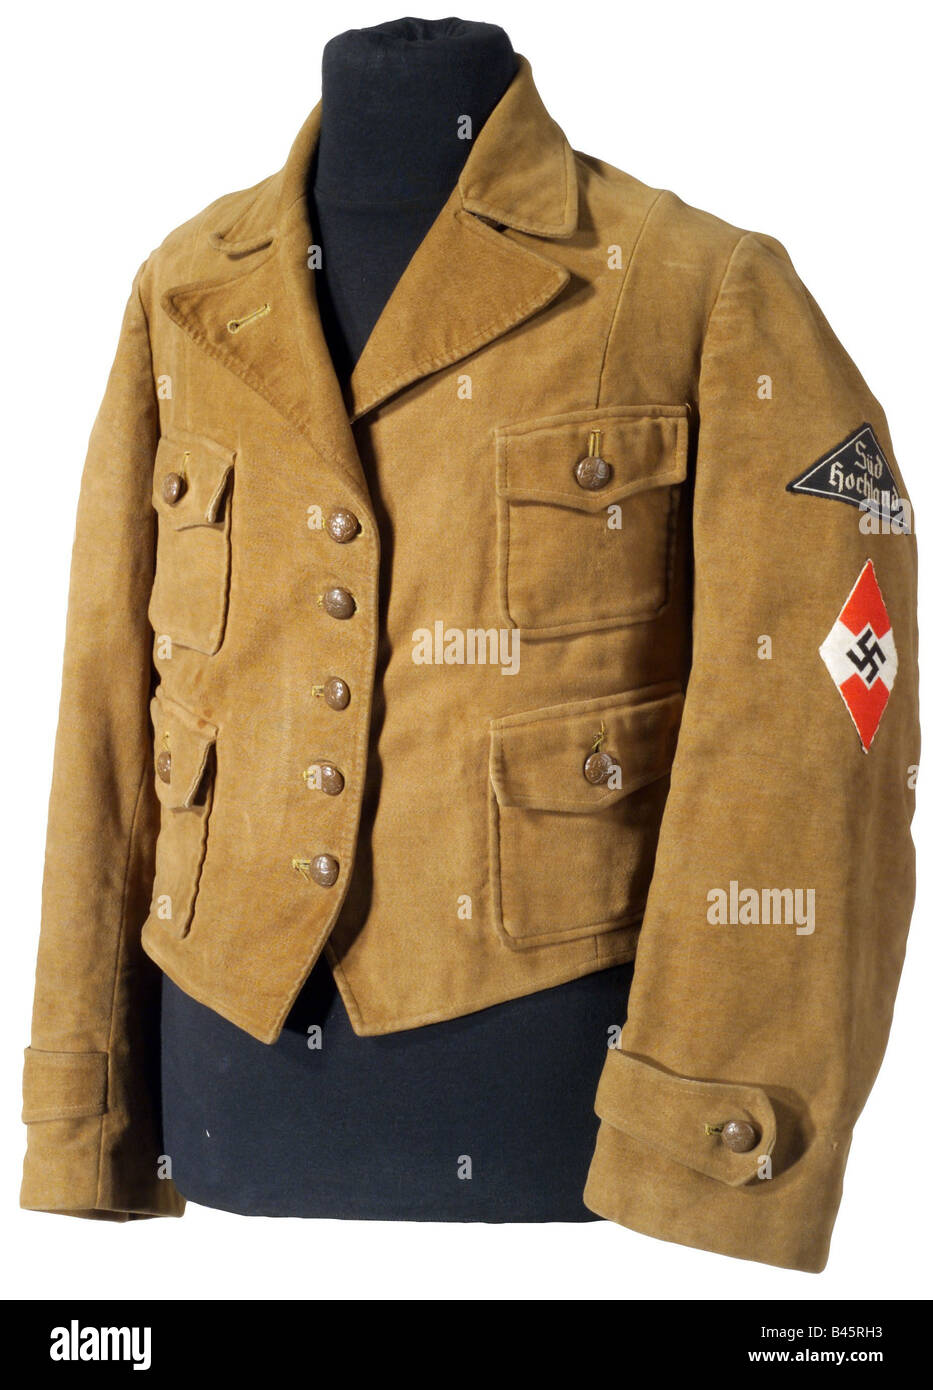 Nazism/National Socialism, organisations, League of German Girls, jacket for Jungmädel (young girls), 1930s, 30s, Nazi Germany, Third Reich, , Stock Photo